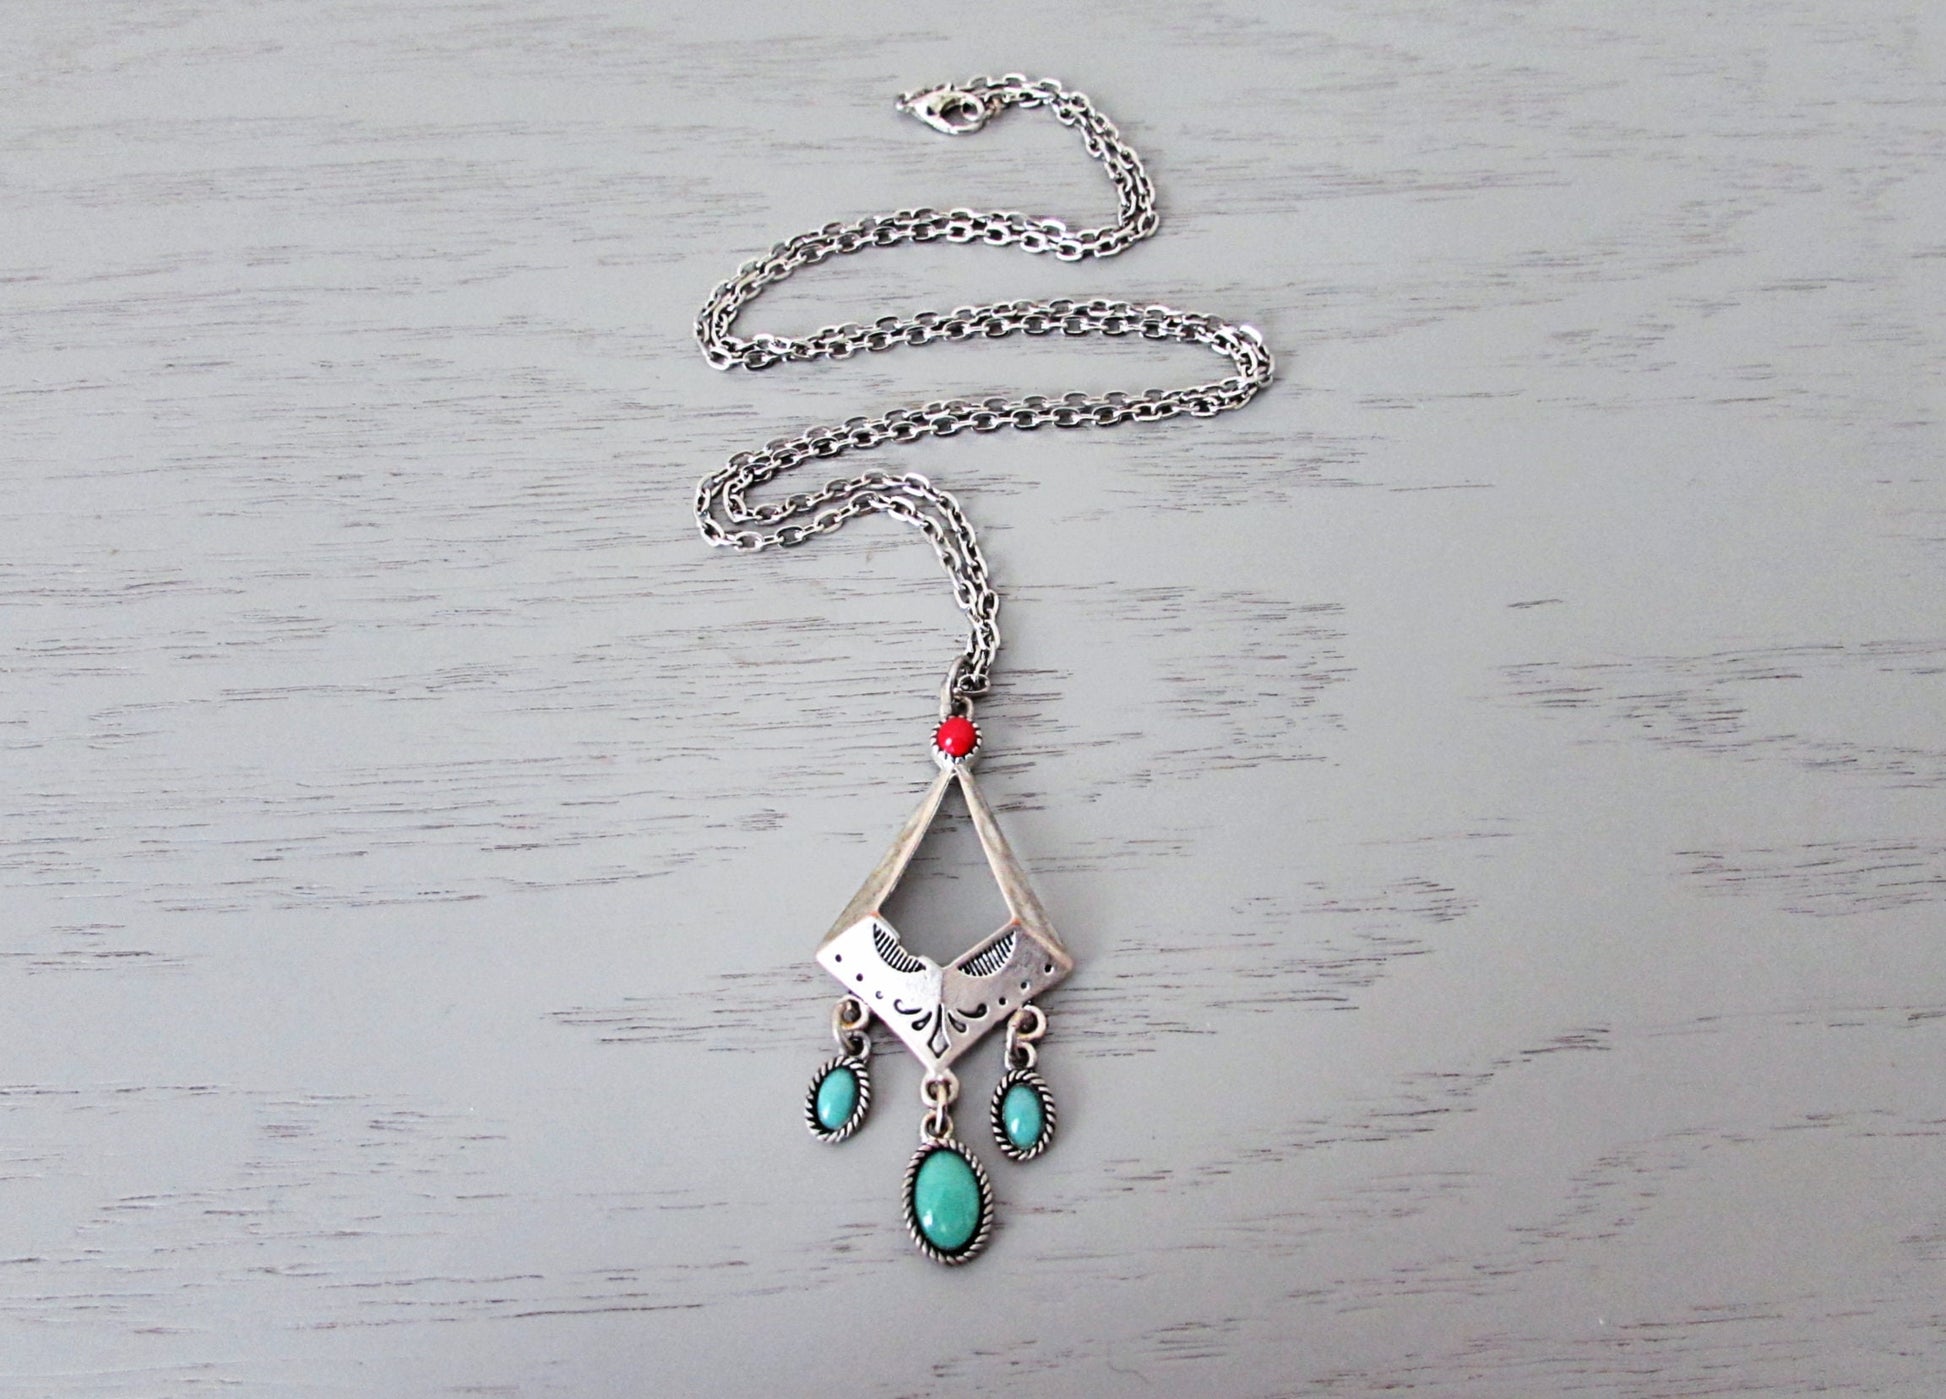 1970s Silver Tone Southwestern Necklace with Turquoise and Red Stones,